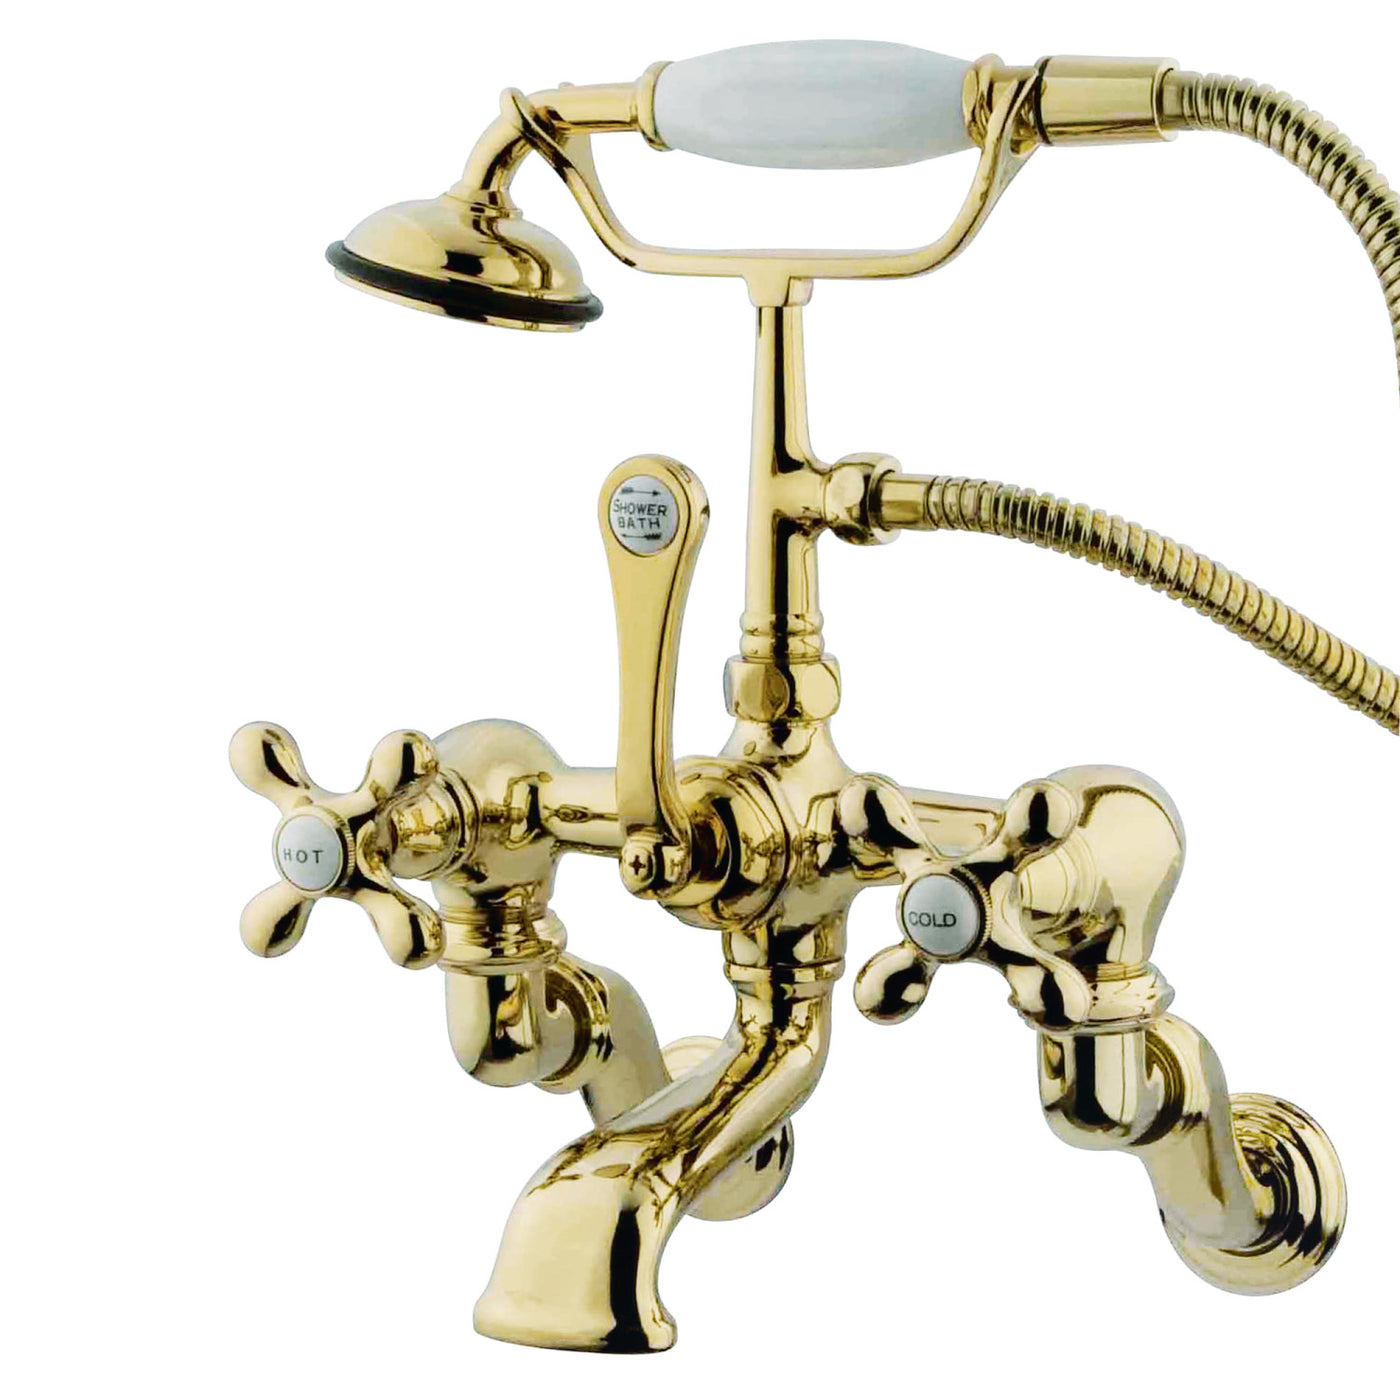 Elements of Design DT4572AX Wall Mount Clawfoot Tub Faucet with Hand Shower, Polished Brass